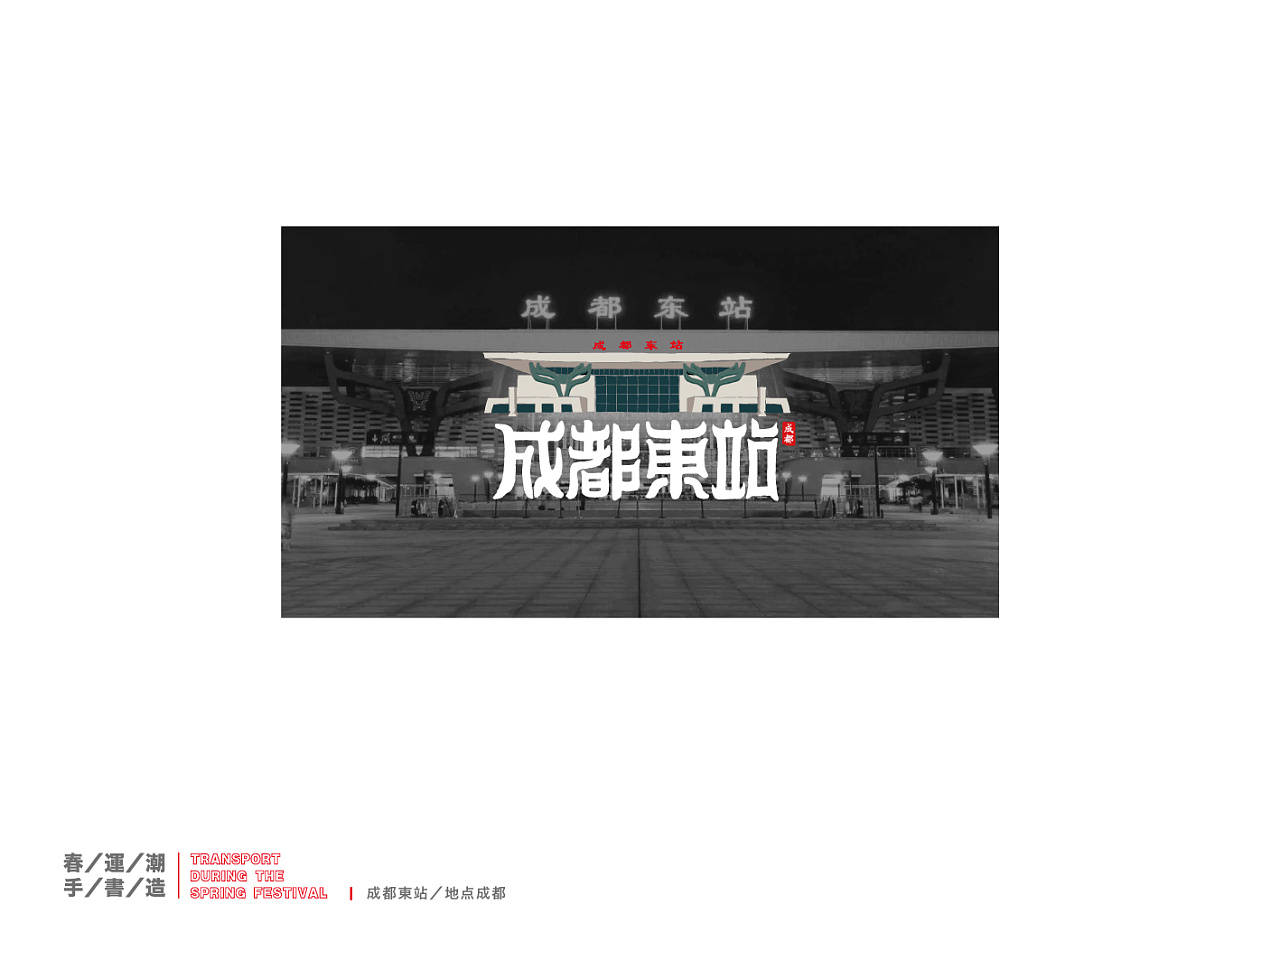 Headline-based fonts-Let's see where is the main battlefield for the Chinese Spring Festival